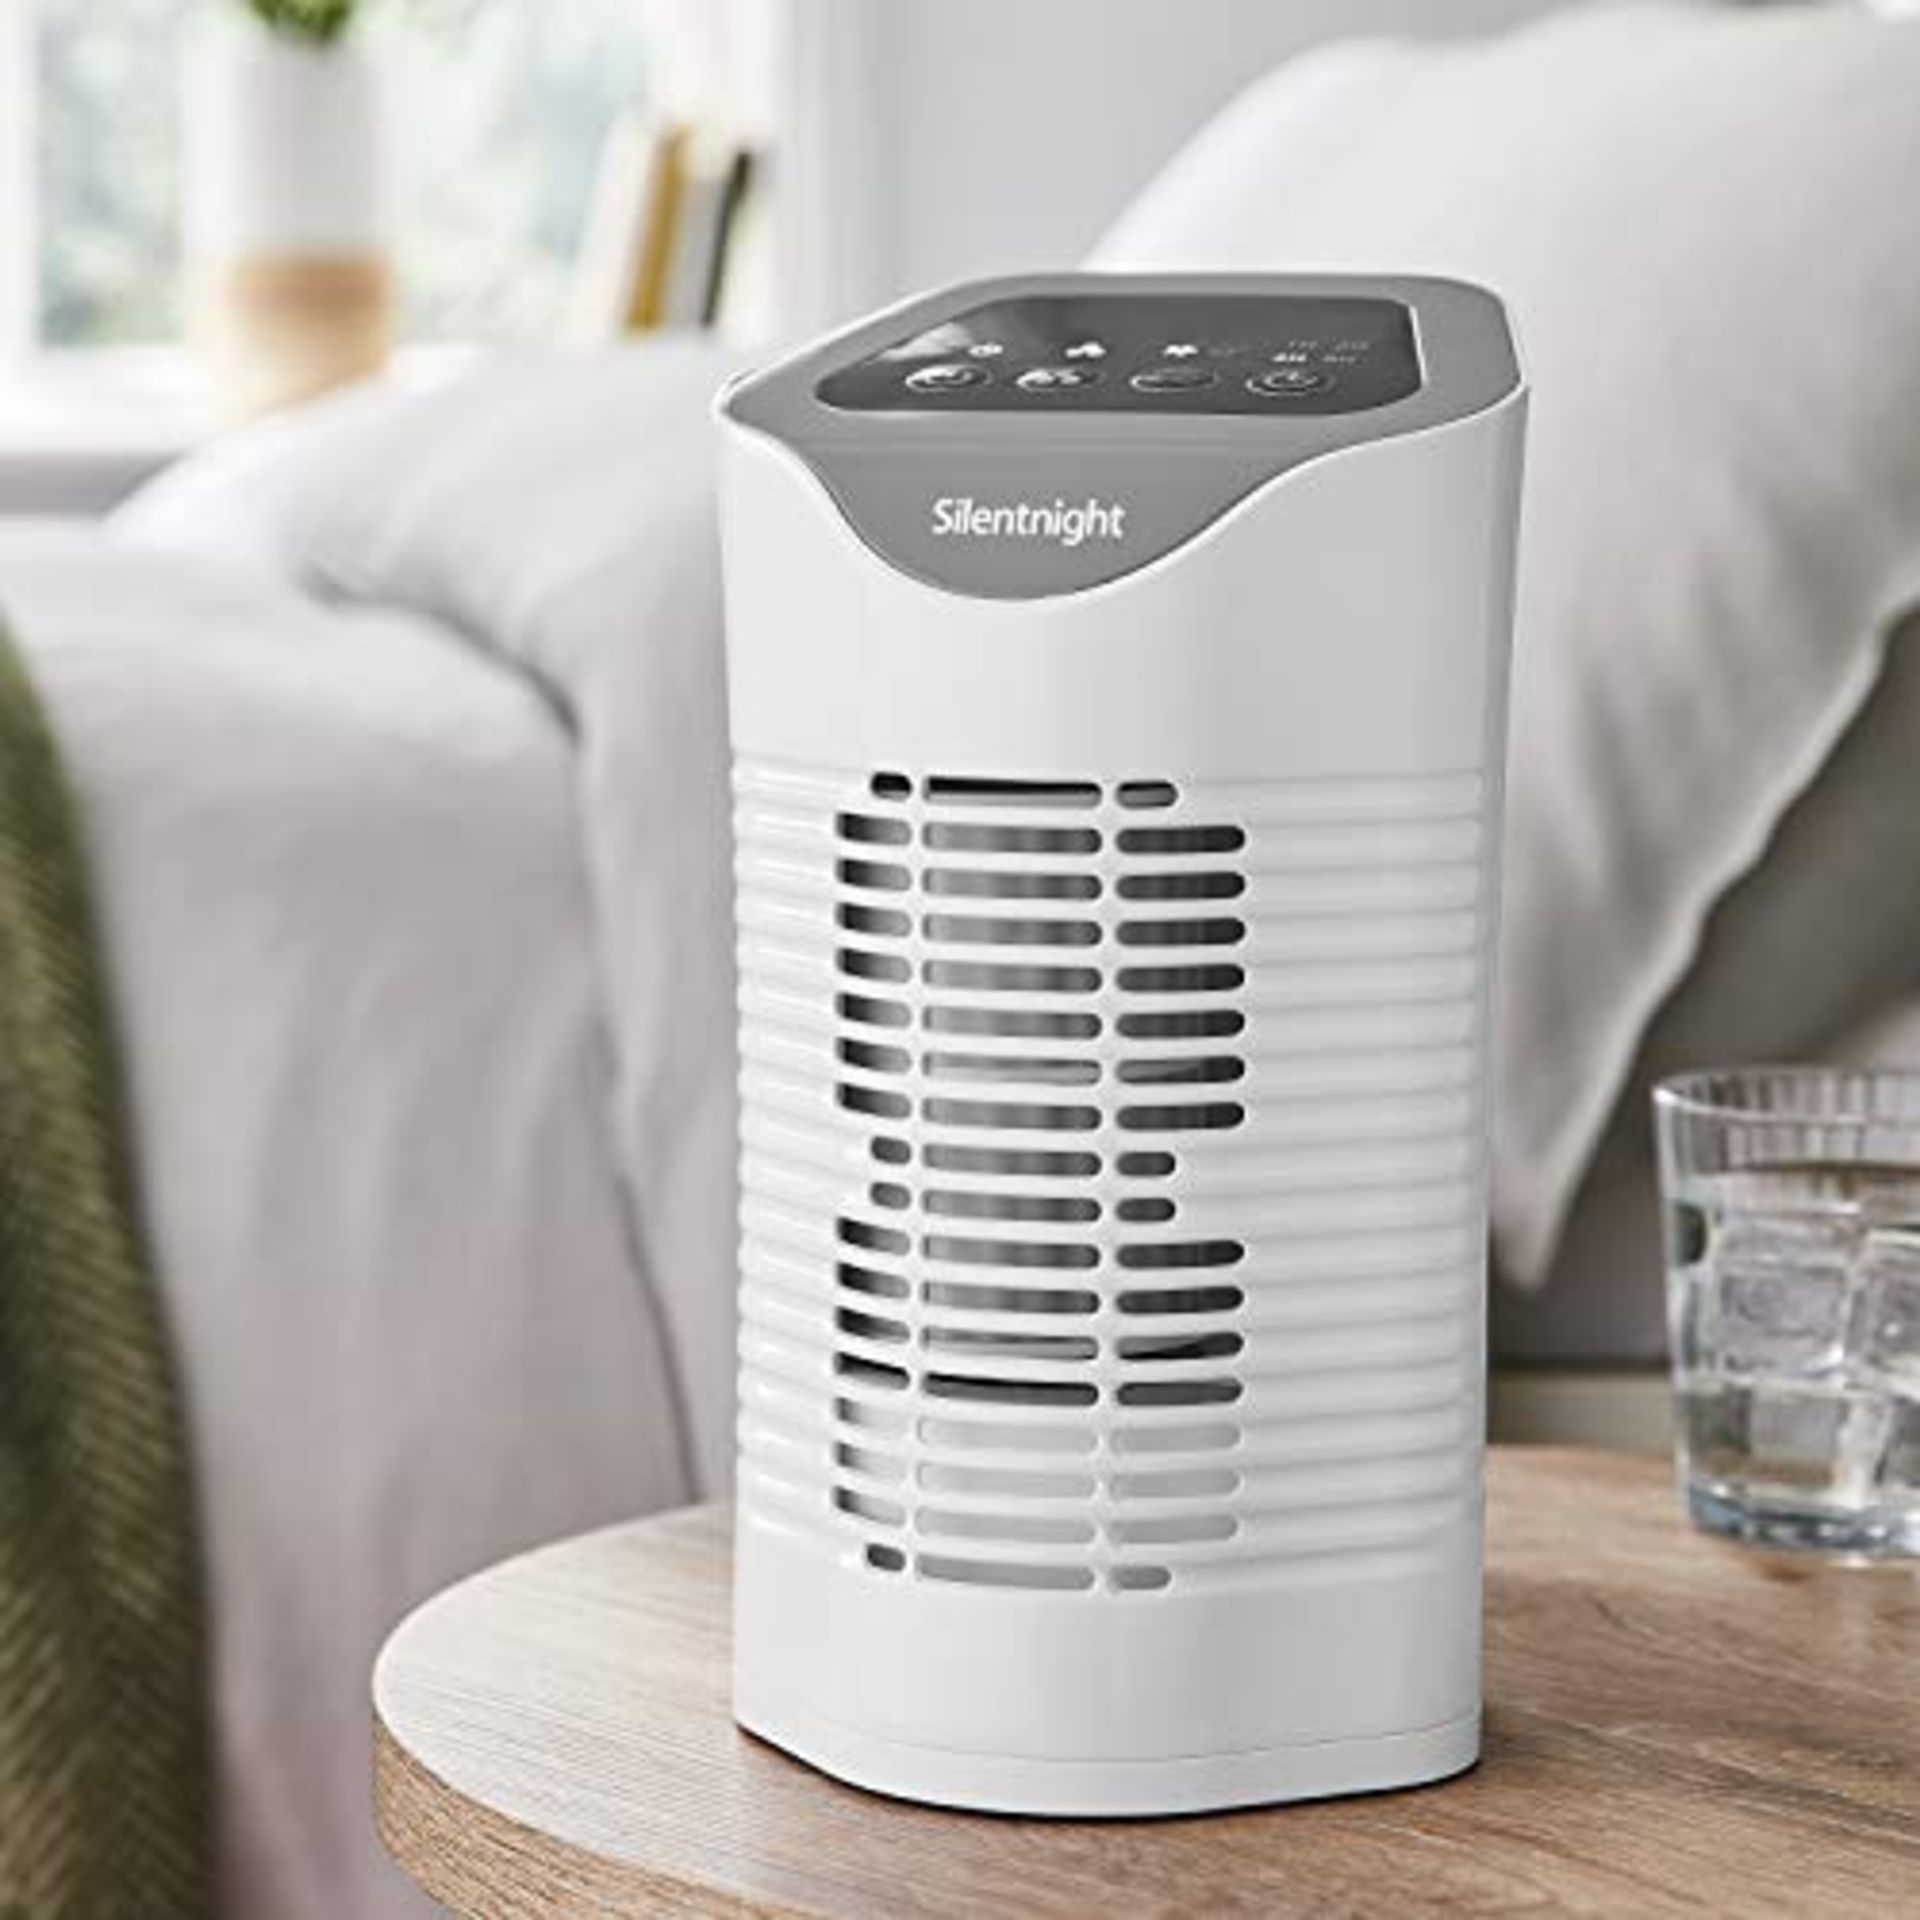 Silentnight Air Purifier with HEPA & Carbon Filters, Air Cleaner for Allergies, Pollen